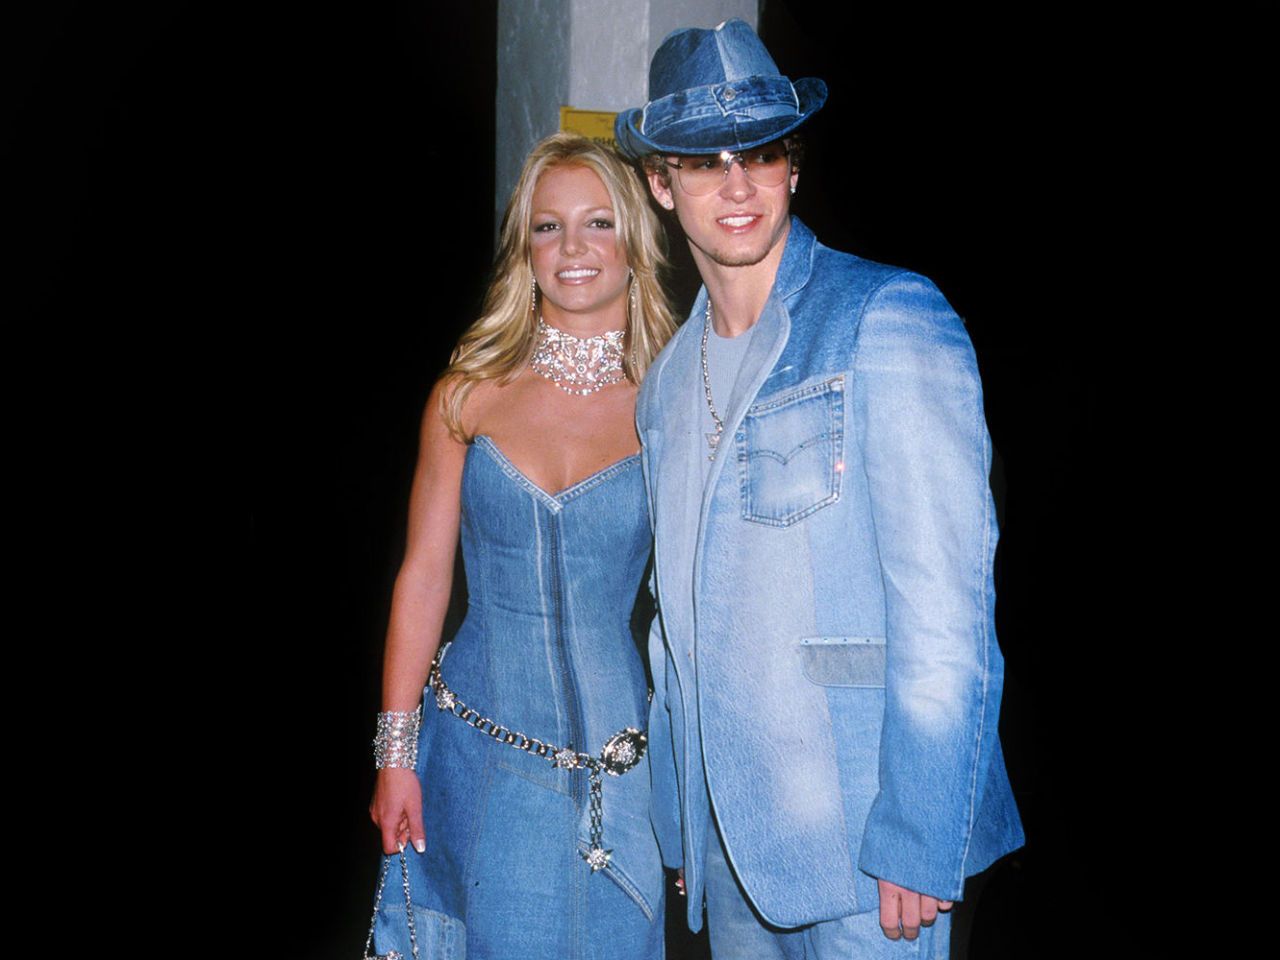 Britney Spears Reacts To the Justin Timberlake Backlash